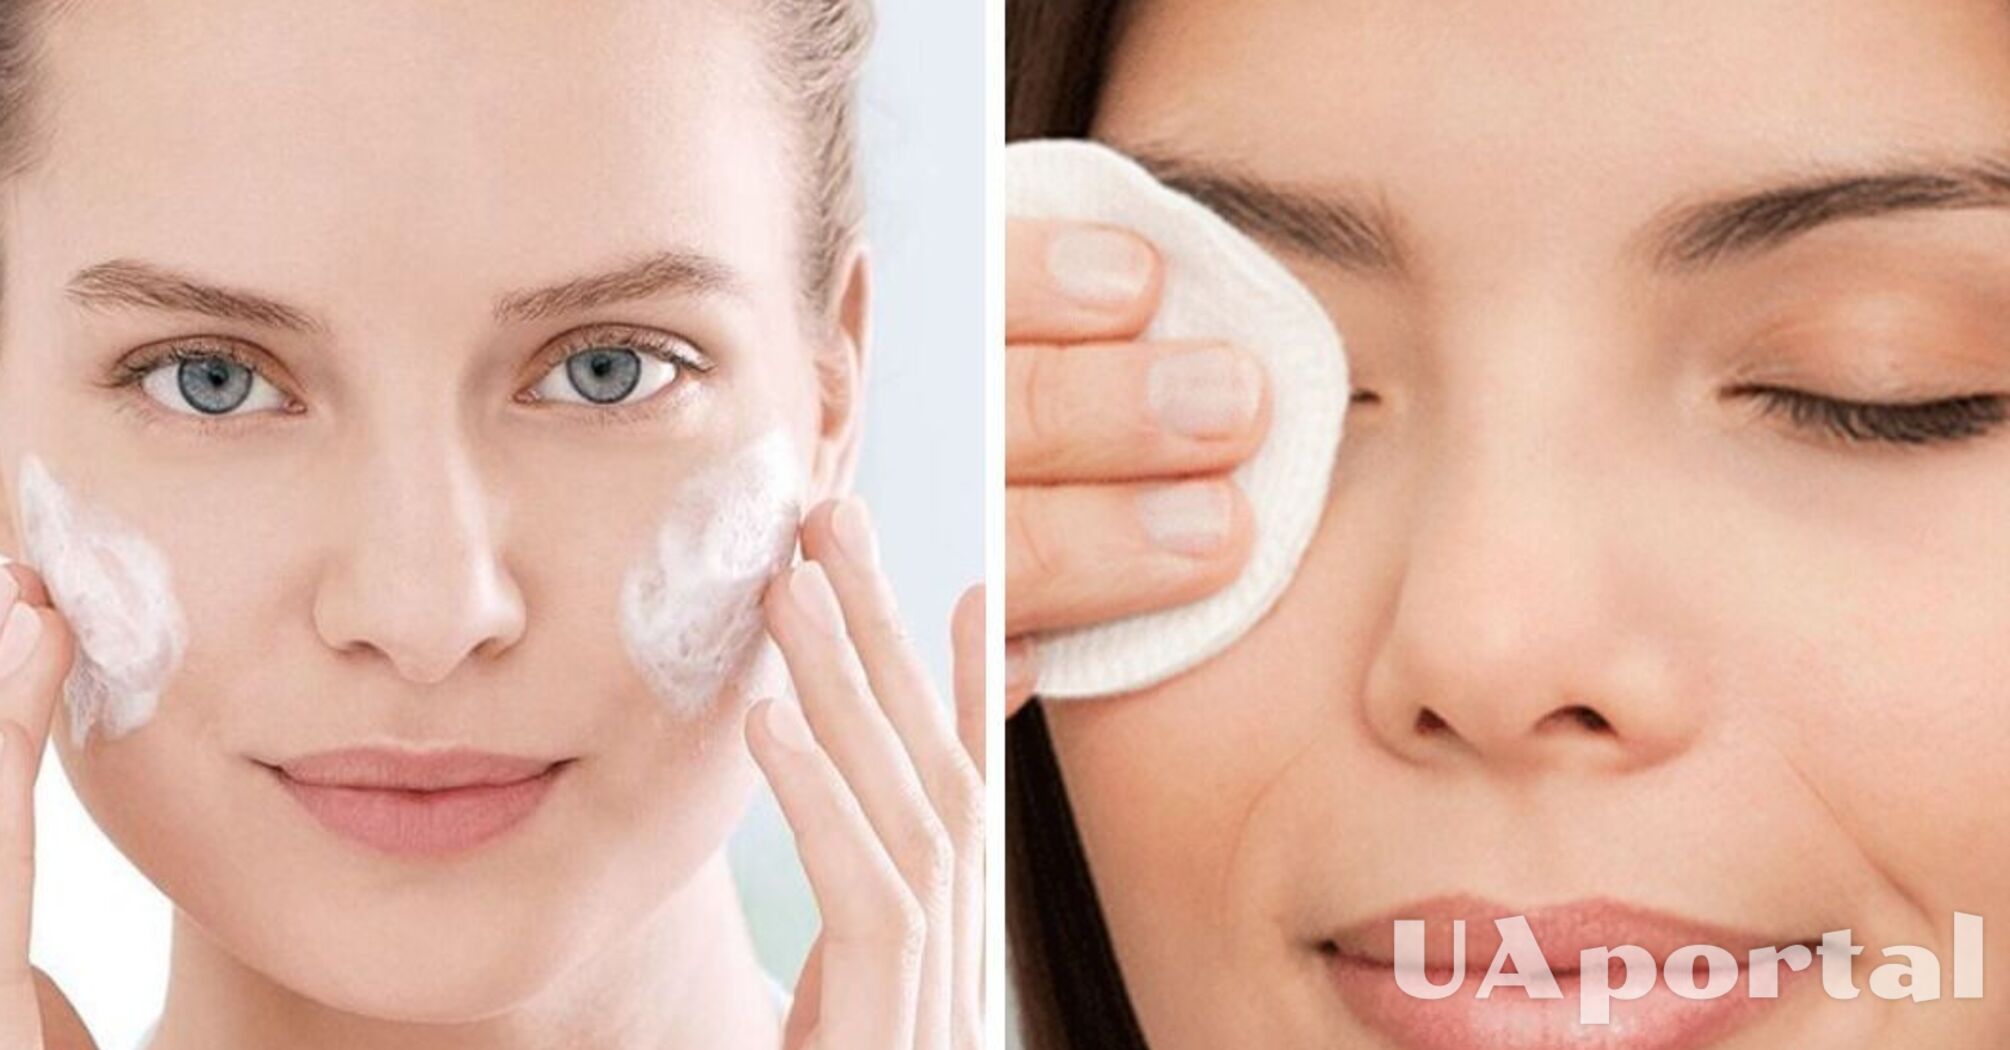 An important step: how to properly skin care before bed